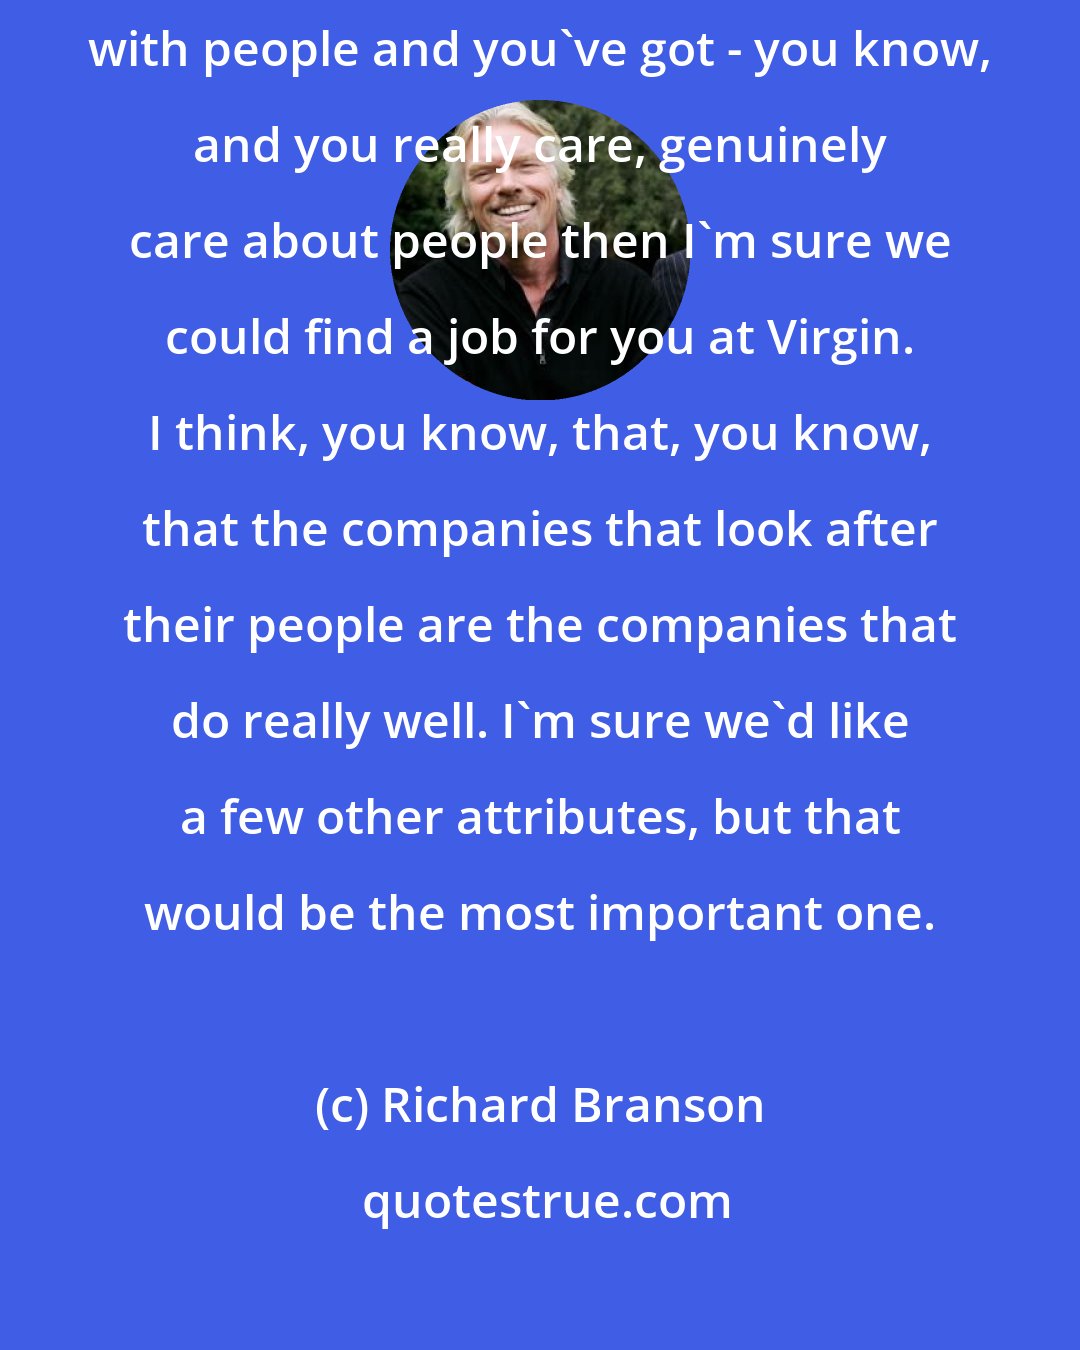 Richard Branson: Virgin, is how good you are with people. If you're - if you're good with people and you've got - you know, and you really care, genuinely care about people then I'm sure we could find a job for you at Virgin. I think, you know, that, you know, that the companies that look after their people are the companies that do really well. I'm sure we'd like a few other attributes, but that would be the most important one.